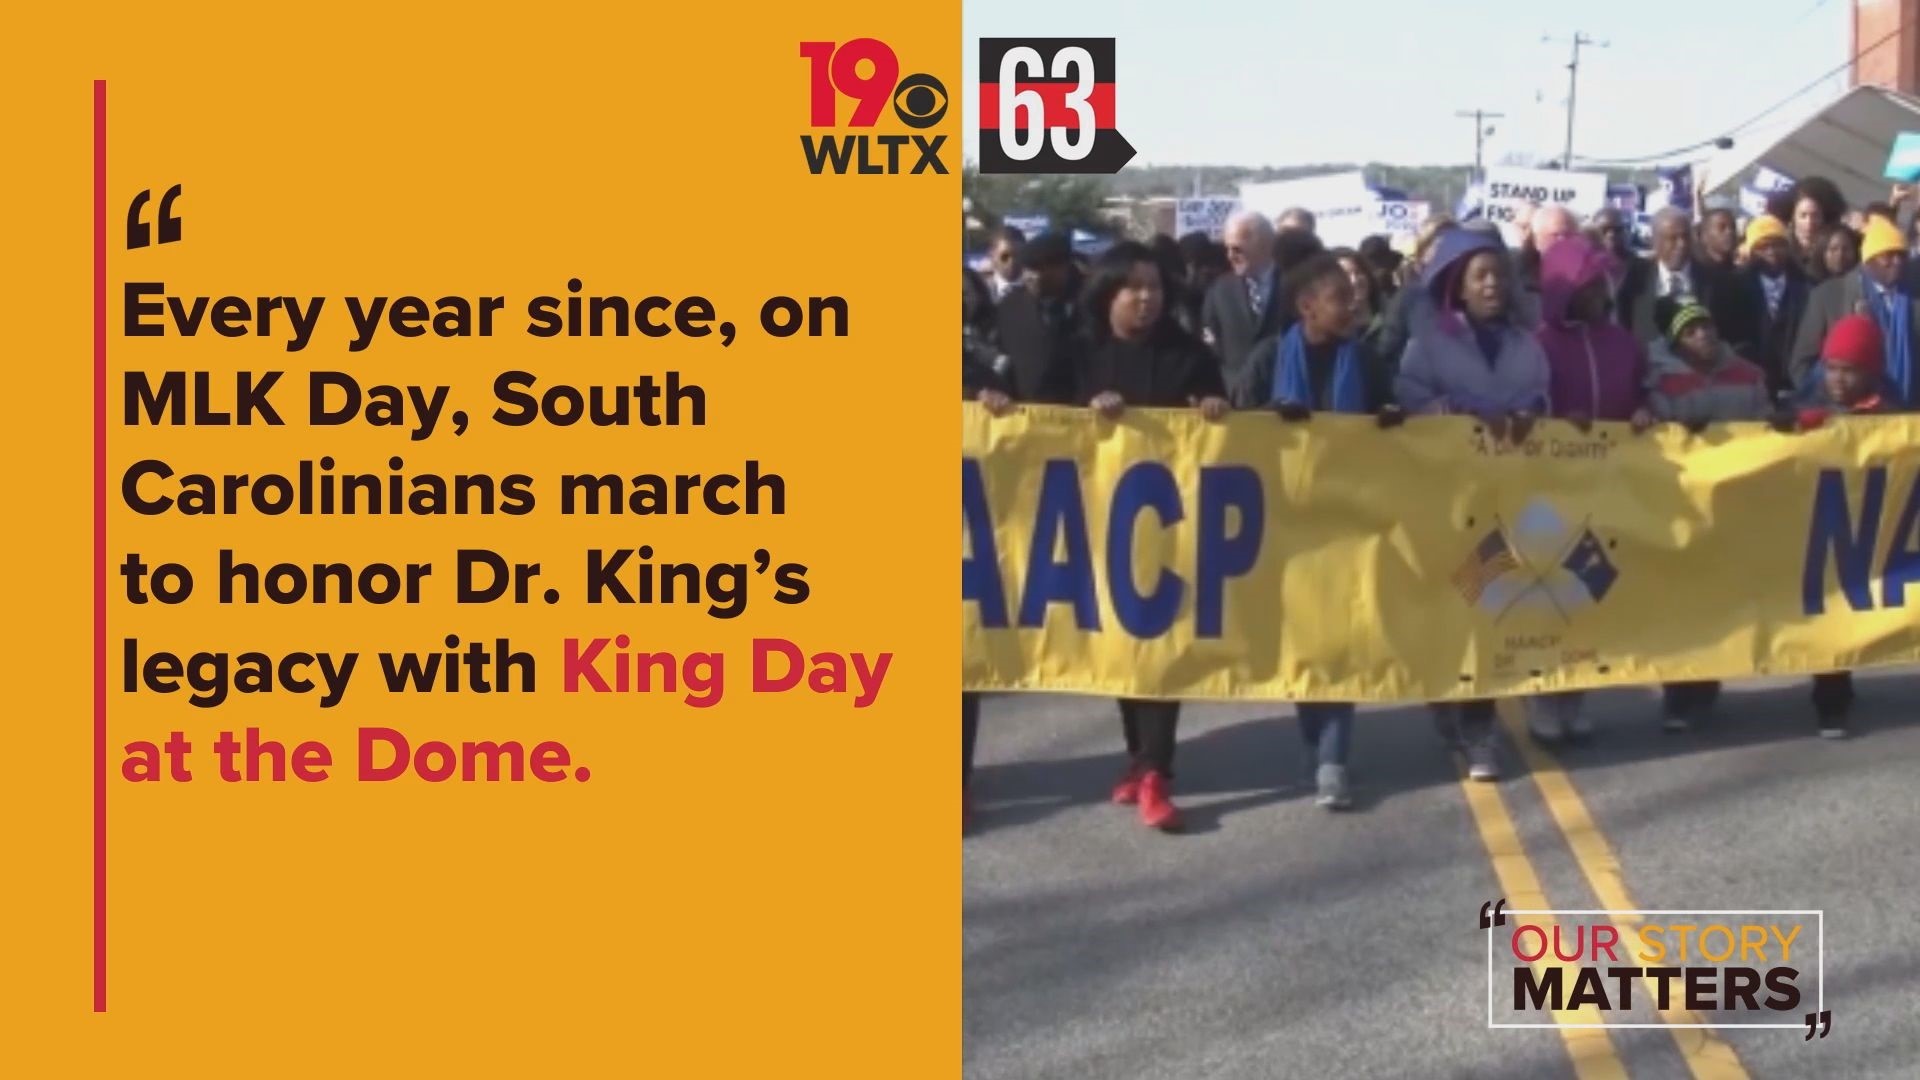 Each year, thousands rally at South Carolina's State House to honor Dr. King and his legacy.